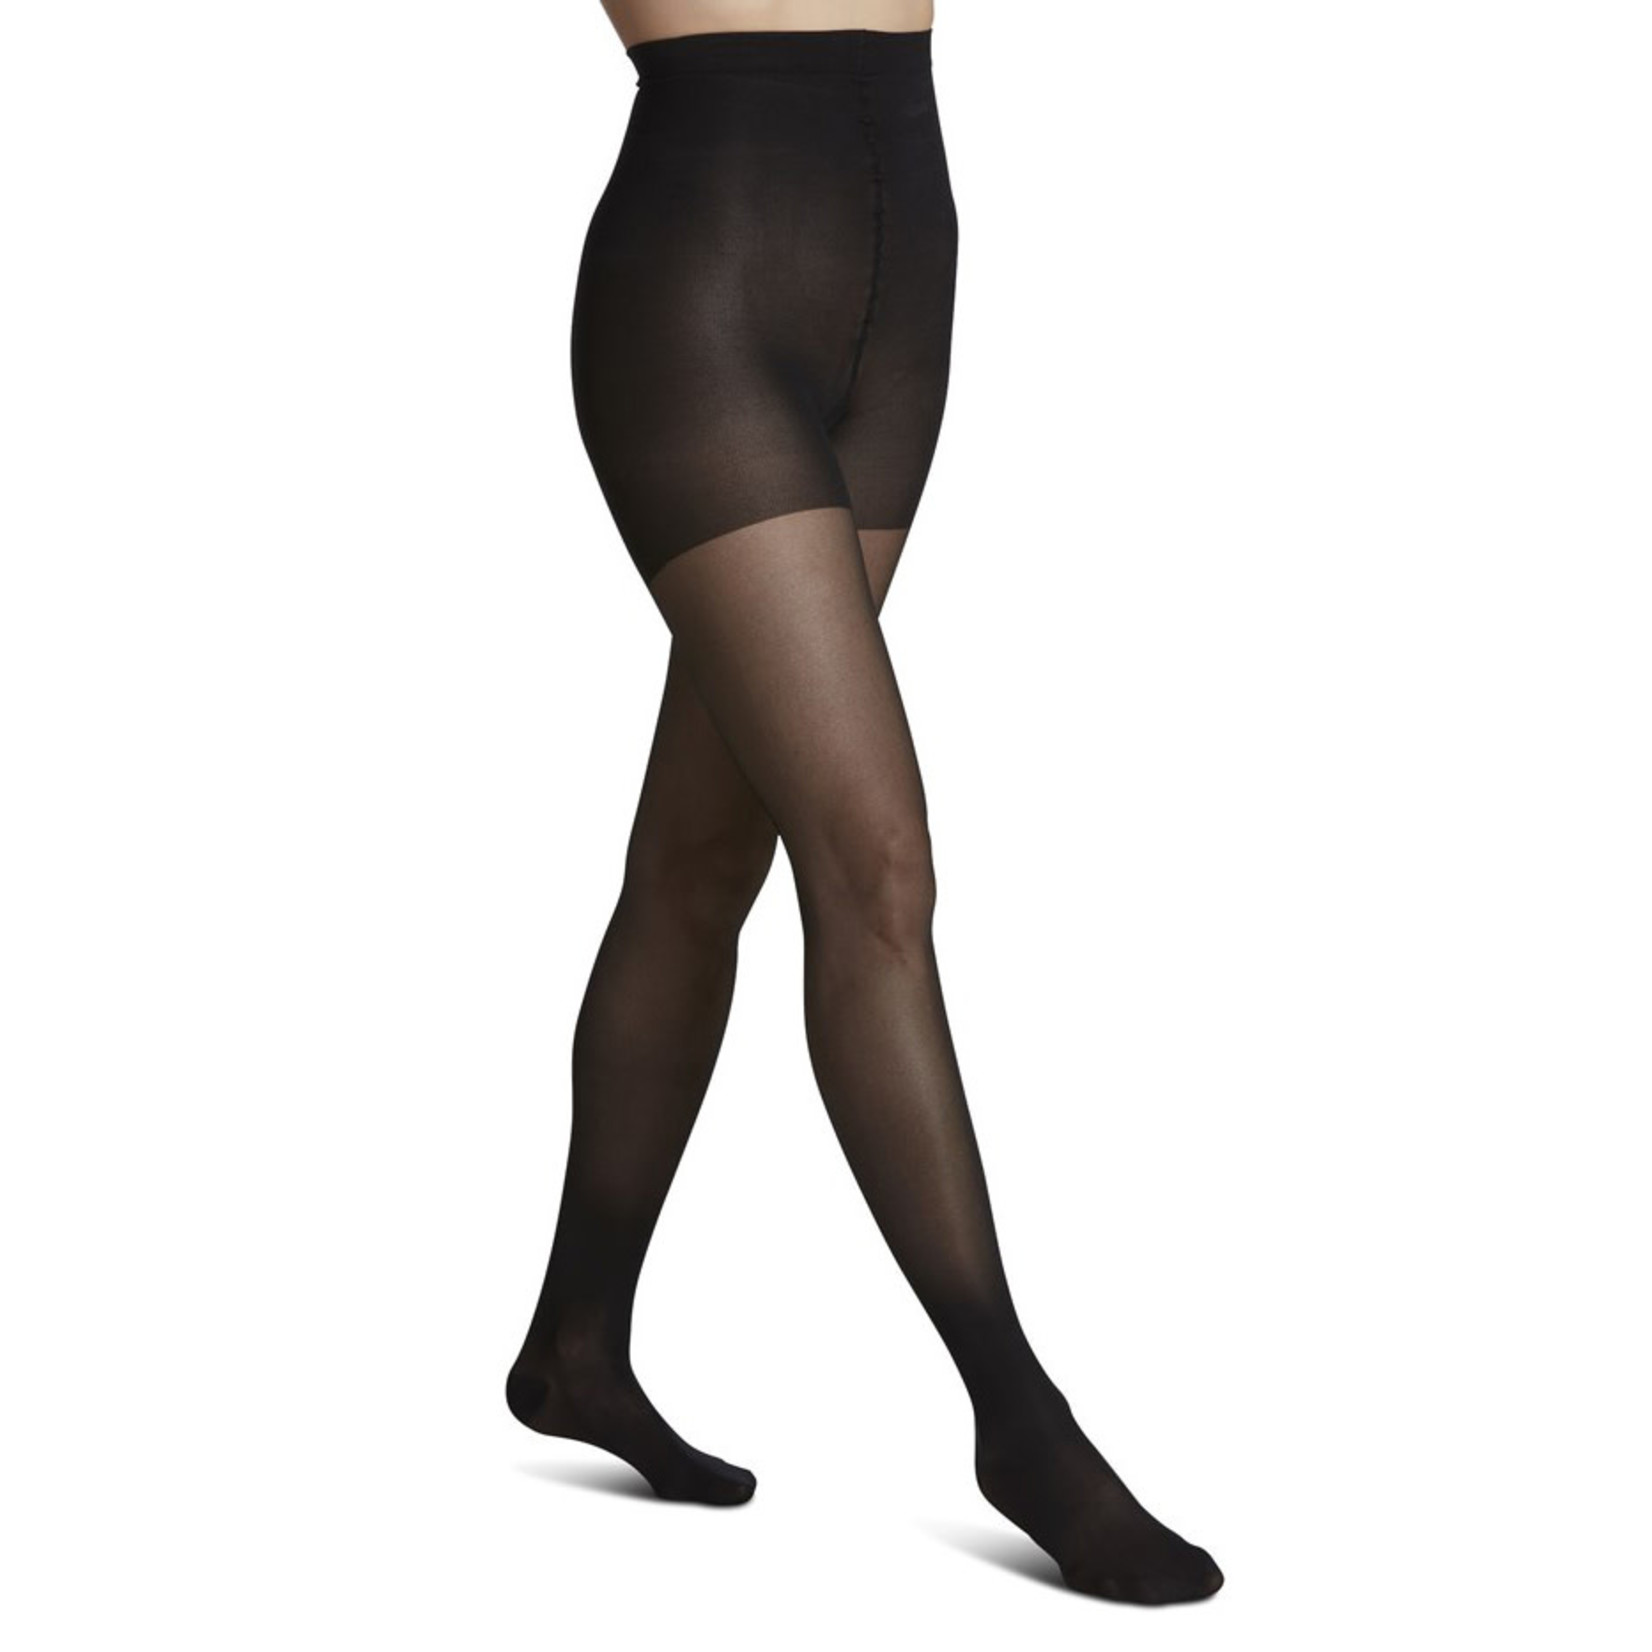 Support Plus Women's Sheer Closed Toe Mild Compression Pantyhose